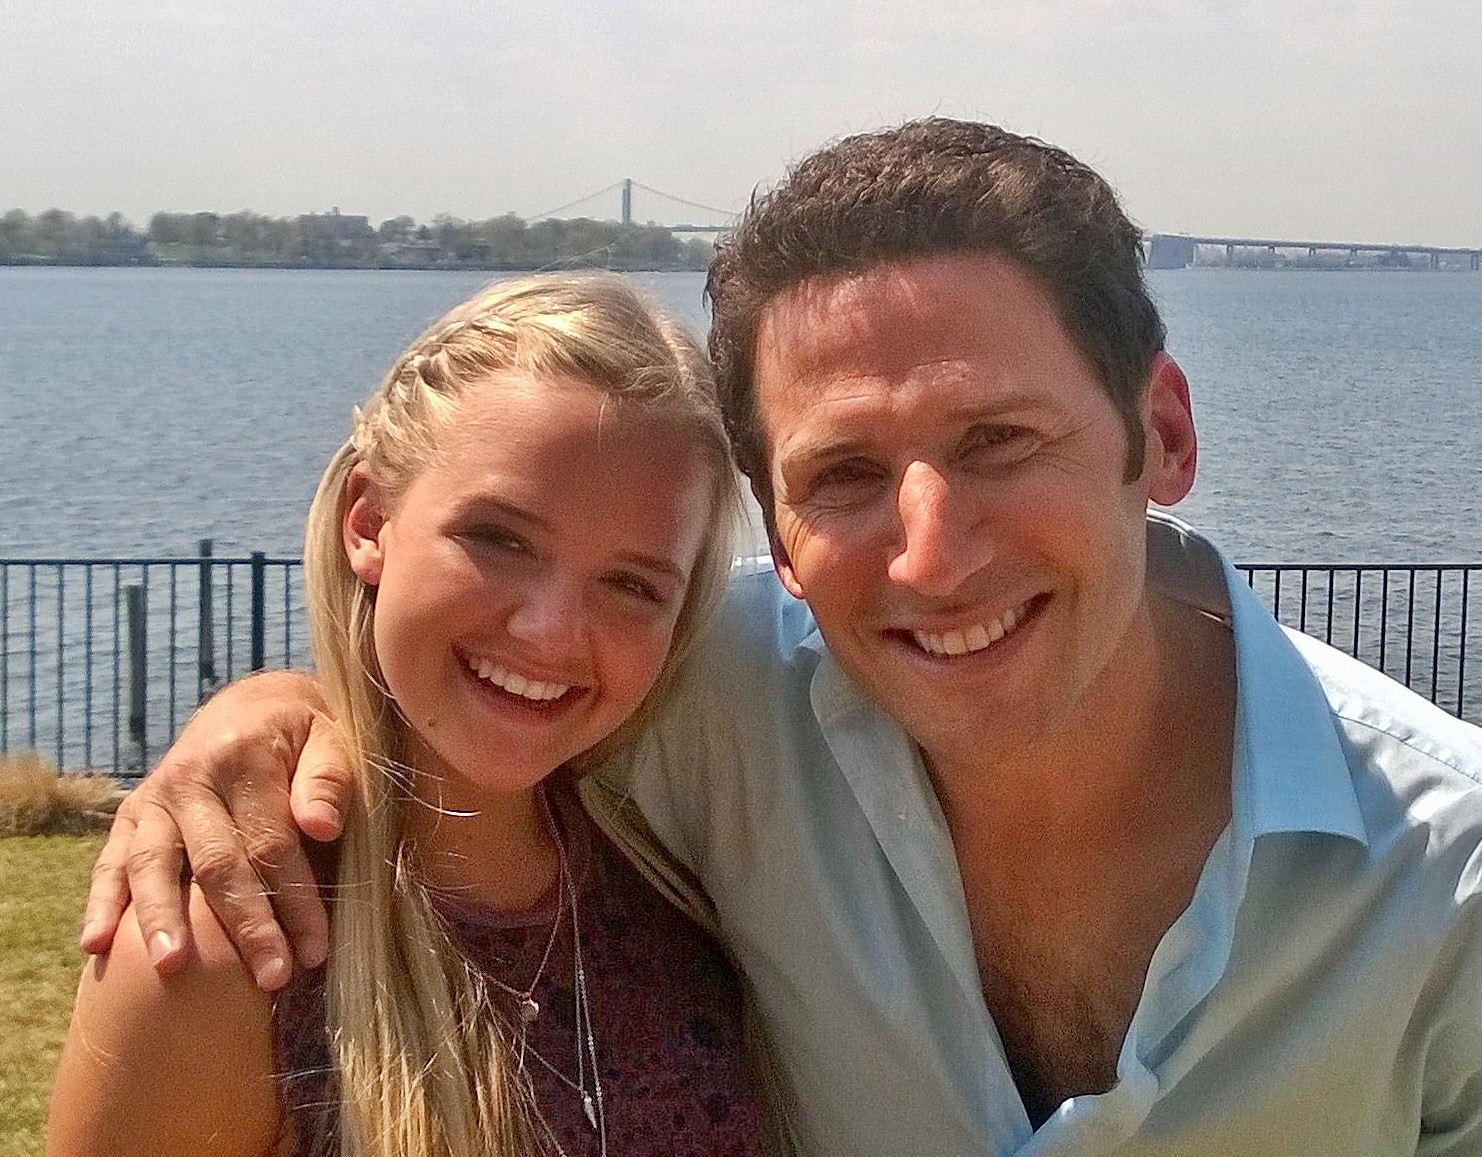 With Mark Feuerstein on the set of Royal Pains